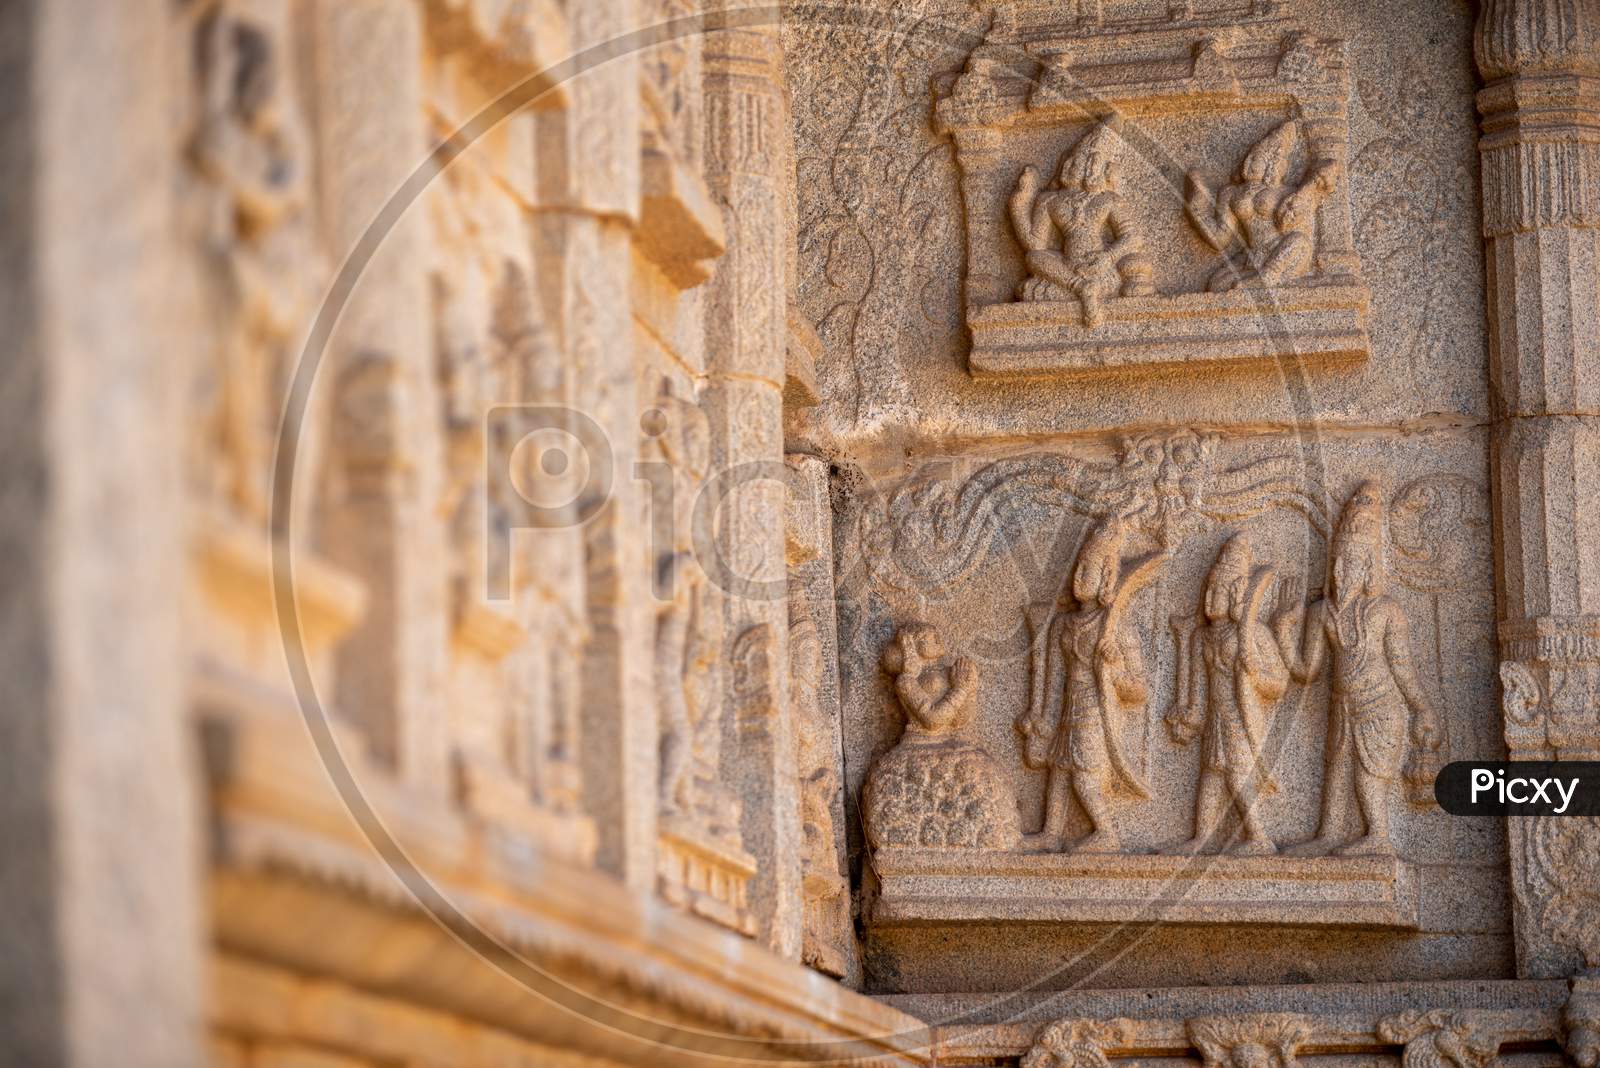 Stone Carvings in an Ancient Hindu Temple in Hampi